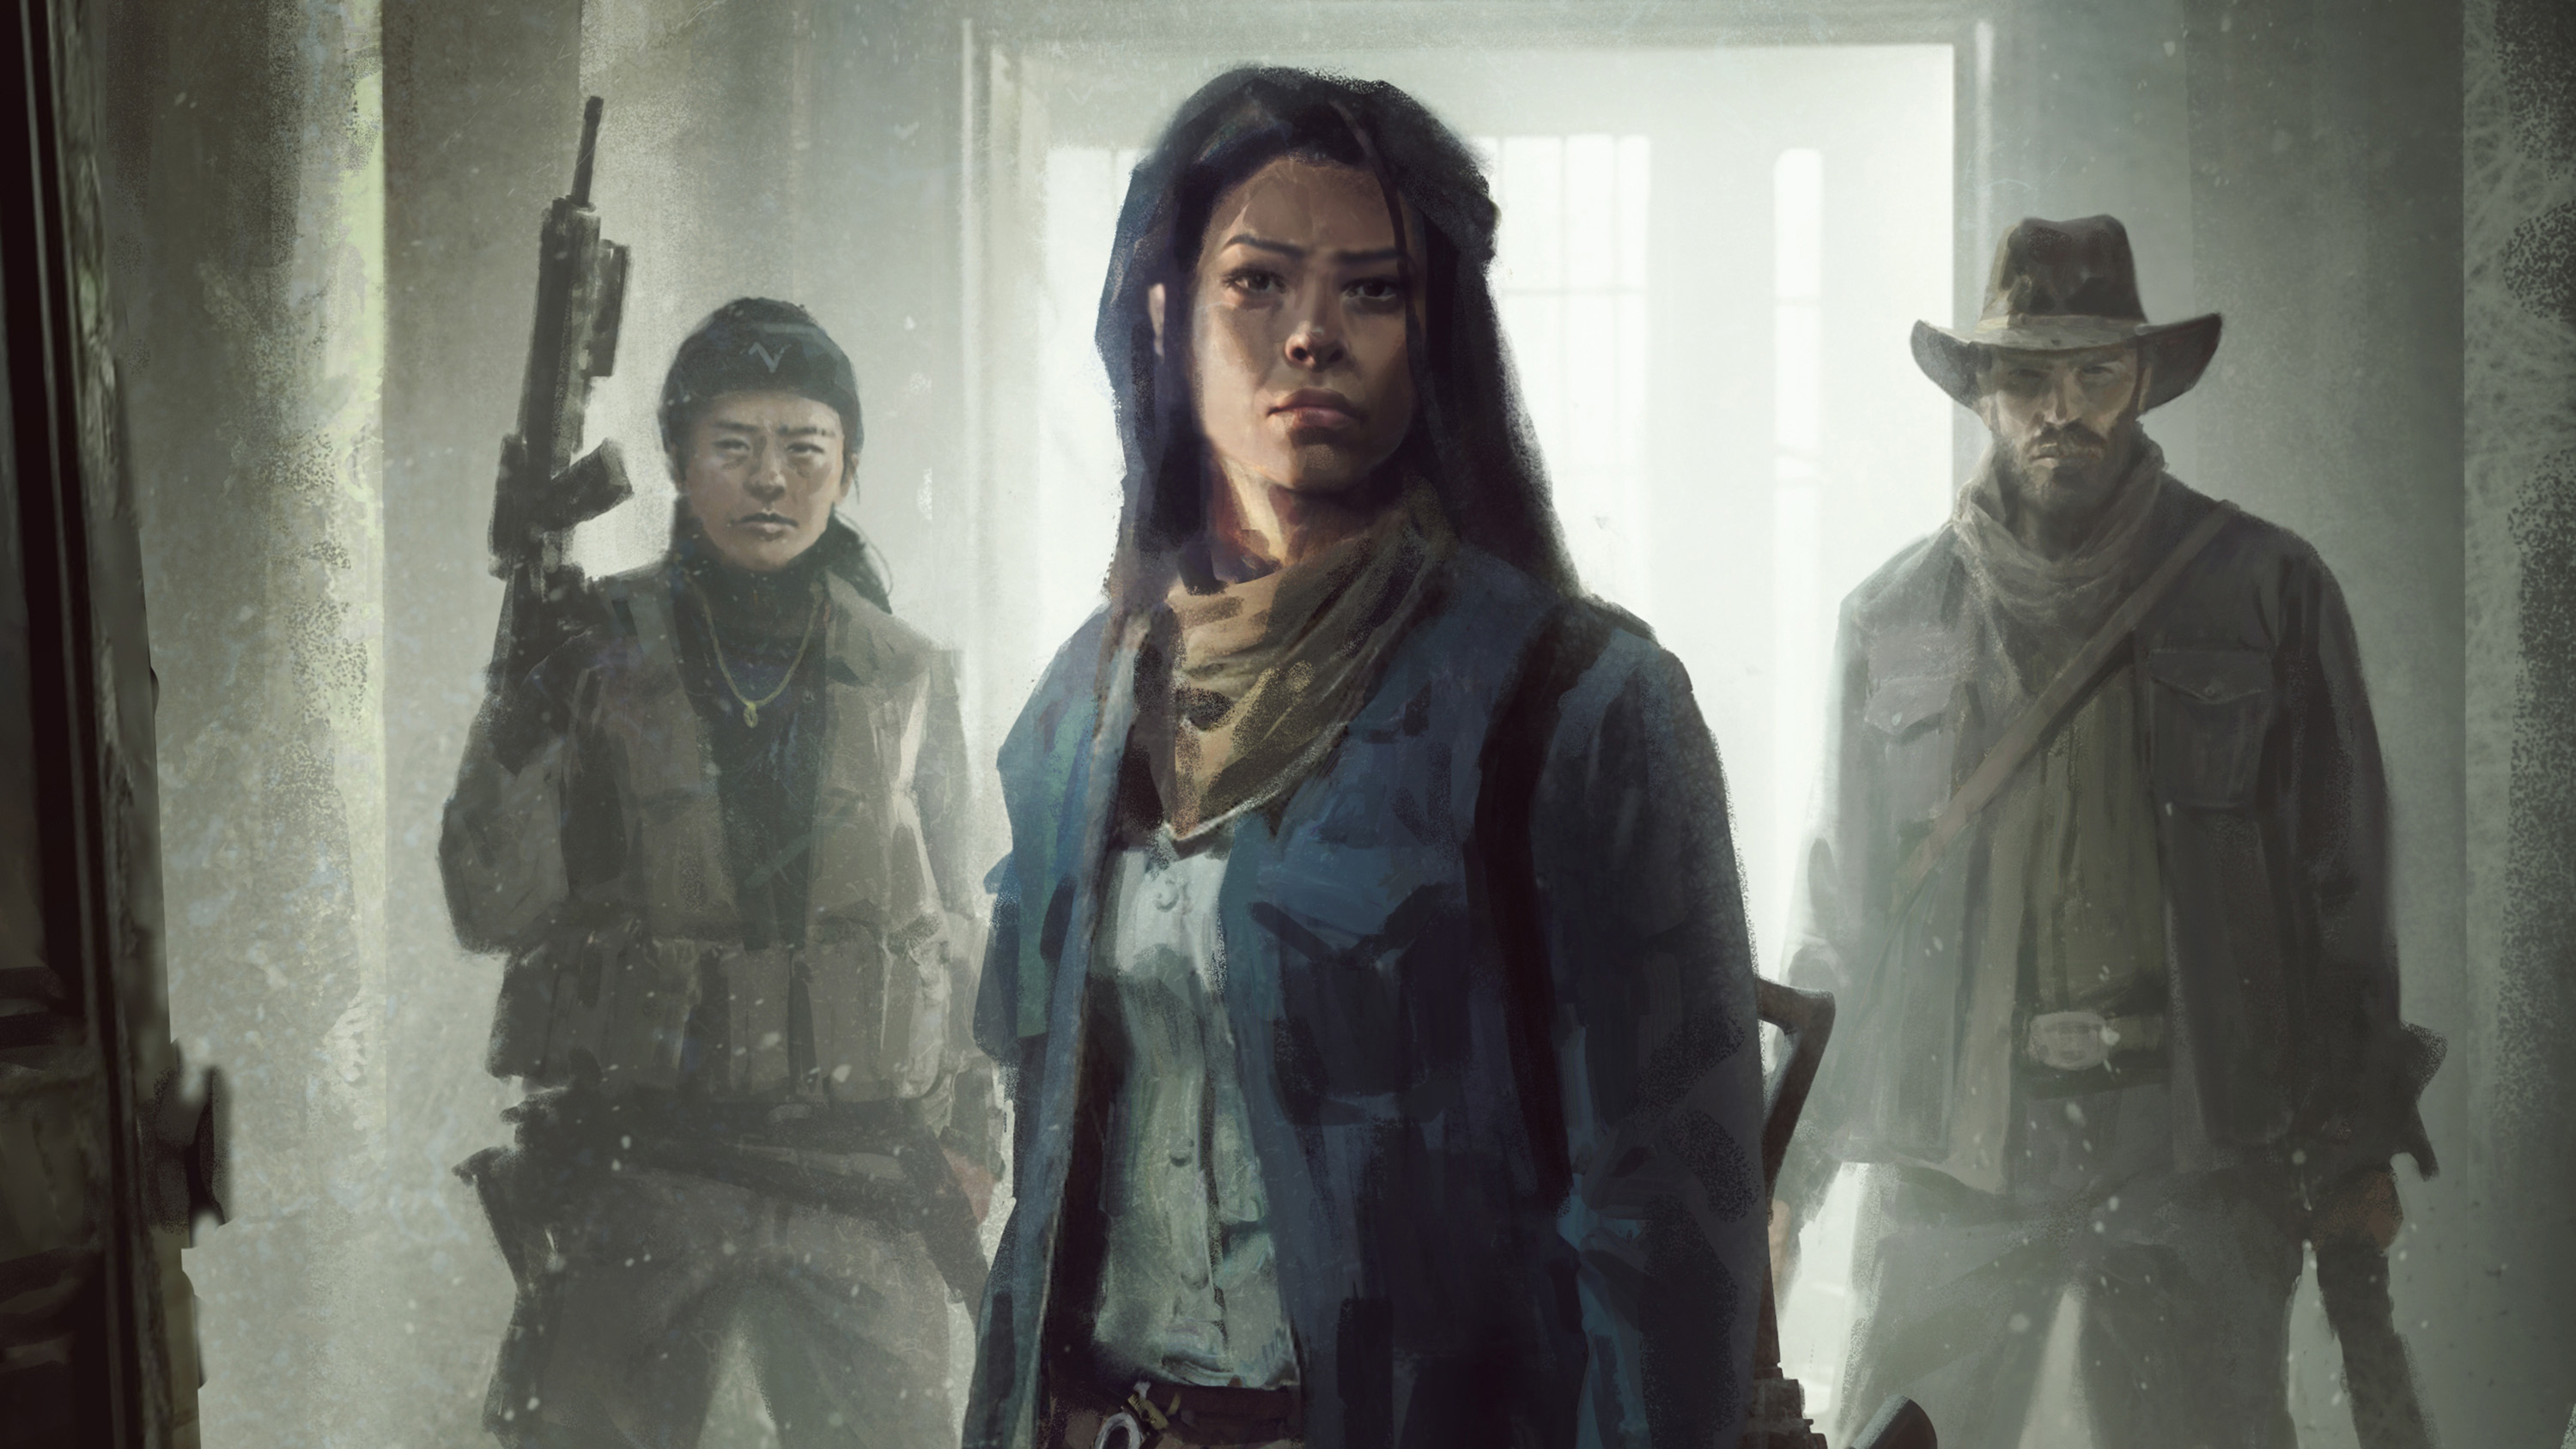 A Black woman, an Asian man, and a white guy in a cowboy hat stand in the vestibule of a rundown house, lit from behind. They stare out of the frame at the viewer, and are all armed with rifles.